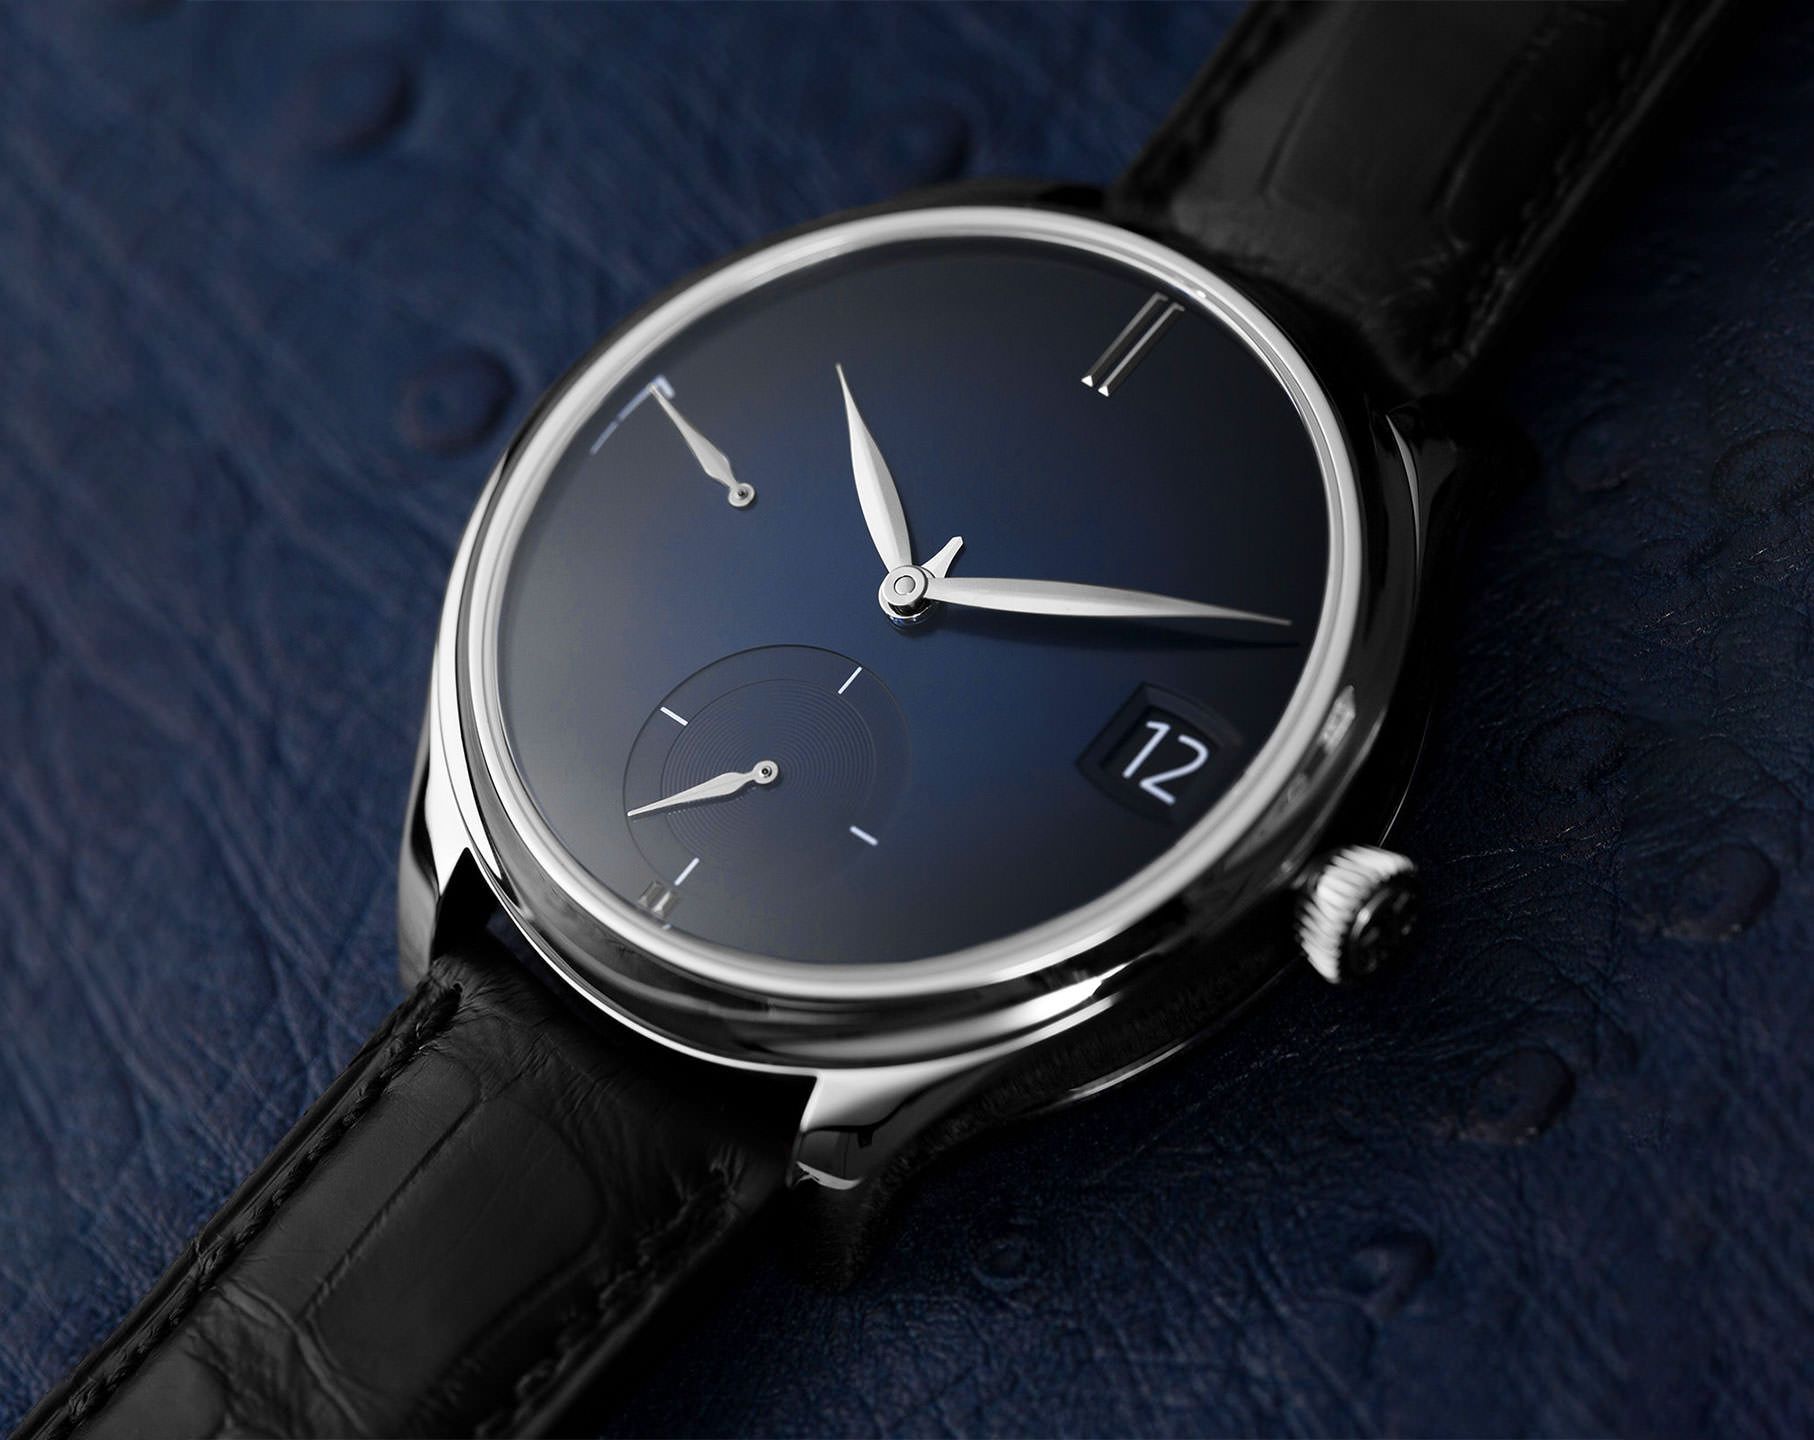 H. Moser & Cie. Endeavour Perpetual Calendar Blue Dial 42 mm Manual Winding Watch For Men - 3